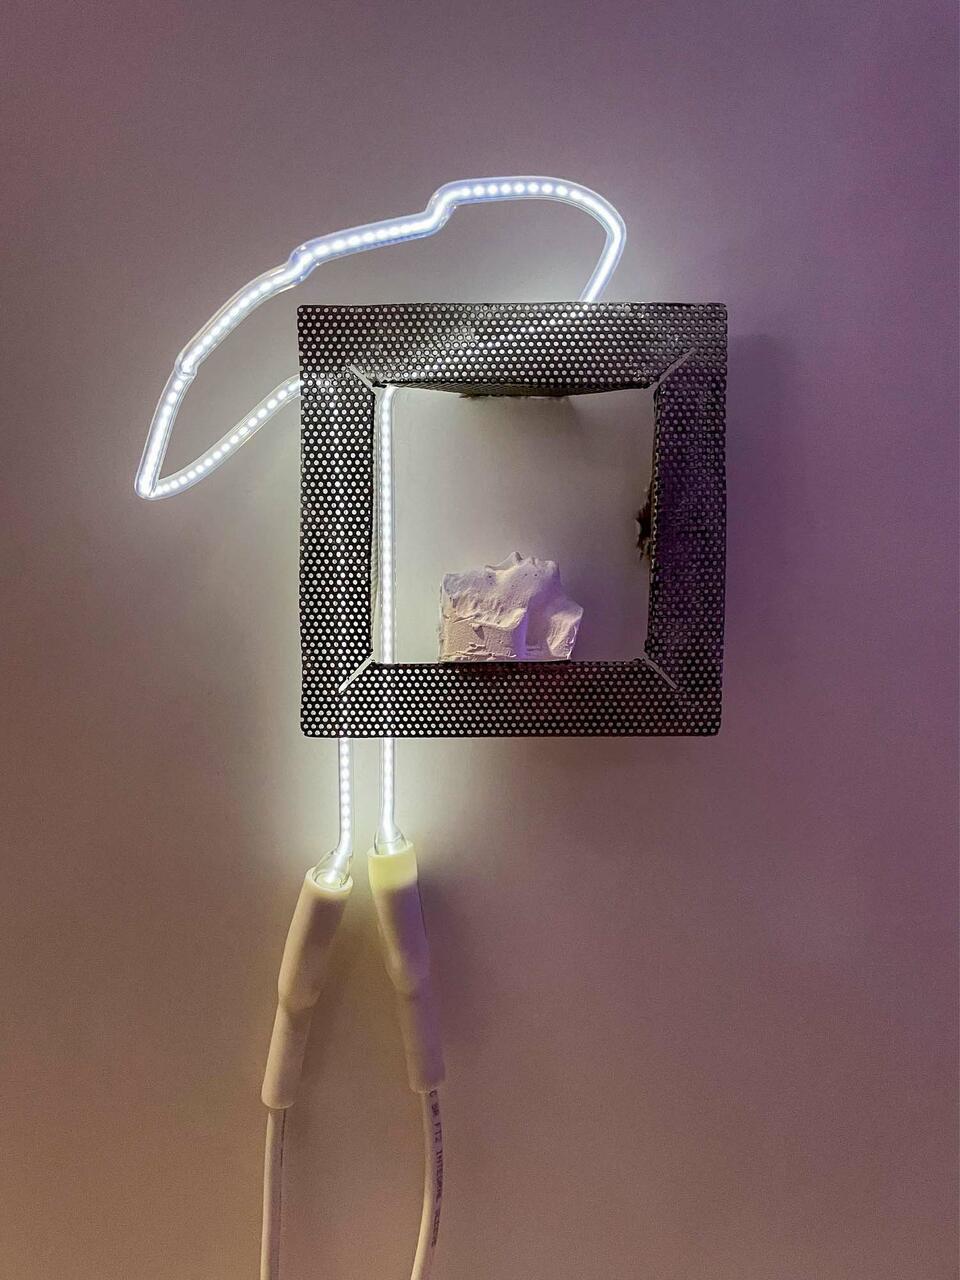 white silouette with a slight purple hue, facing upward within the frame of perferated steel, a squiggle of neon light in a white color with dotted pattern and wiring is to the left 